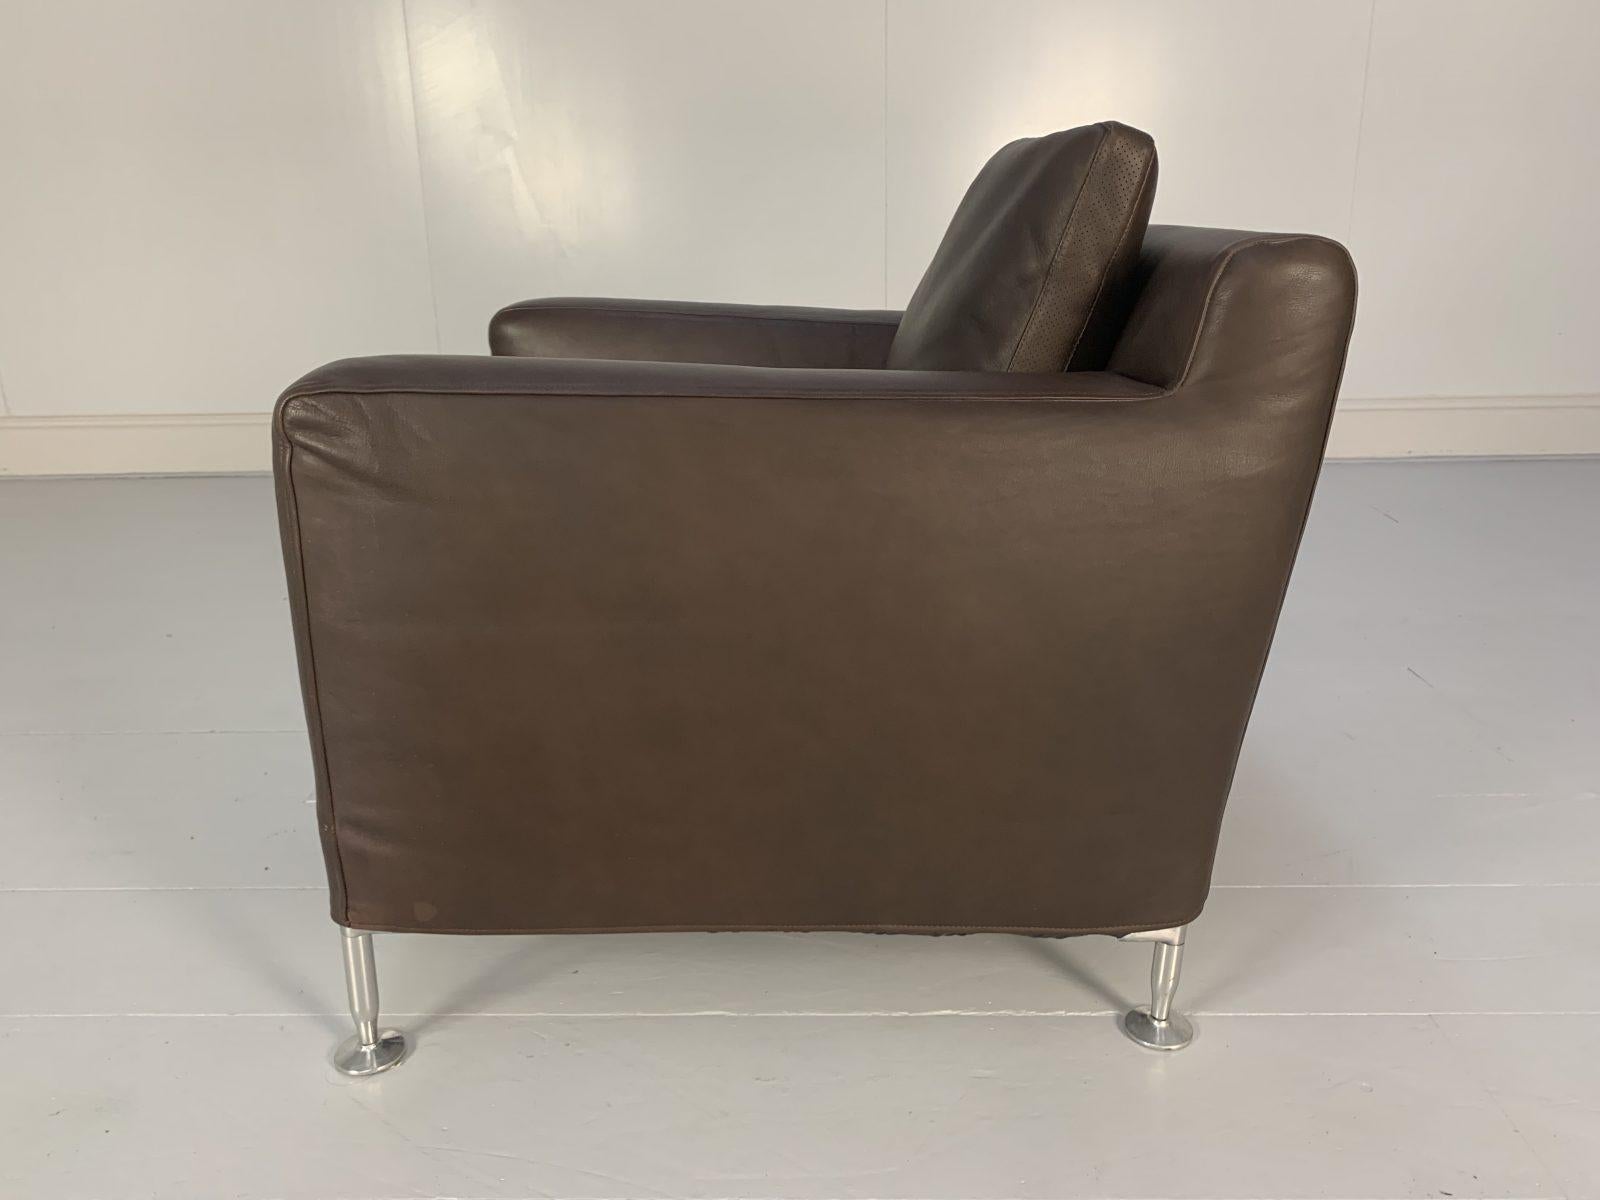 Pair of B&B Italia “Harry H85” Armchairs in Brown “Gamma” Leather For Sale 5